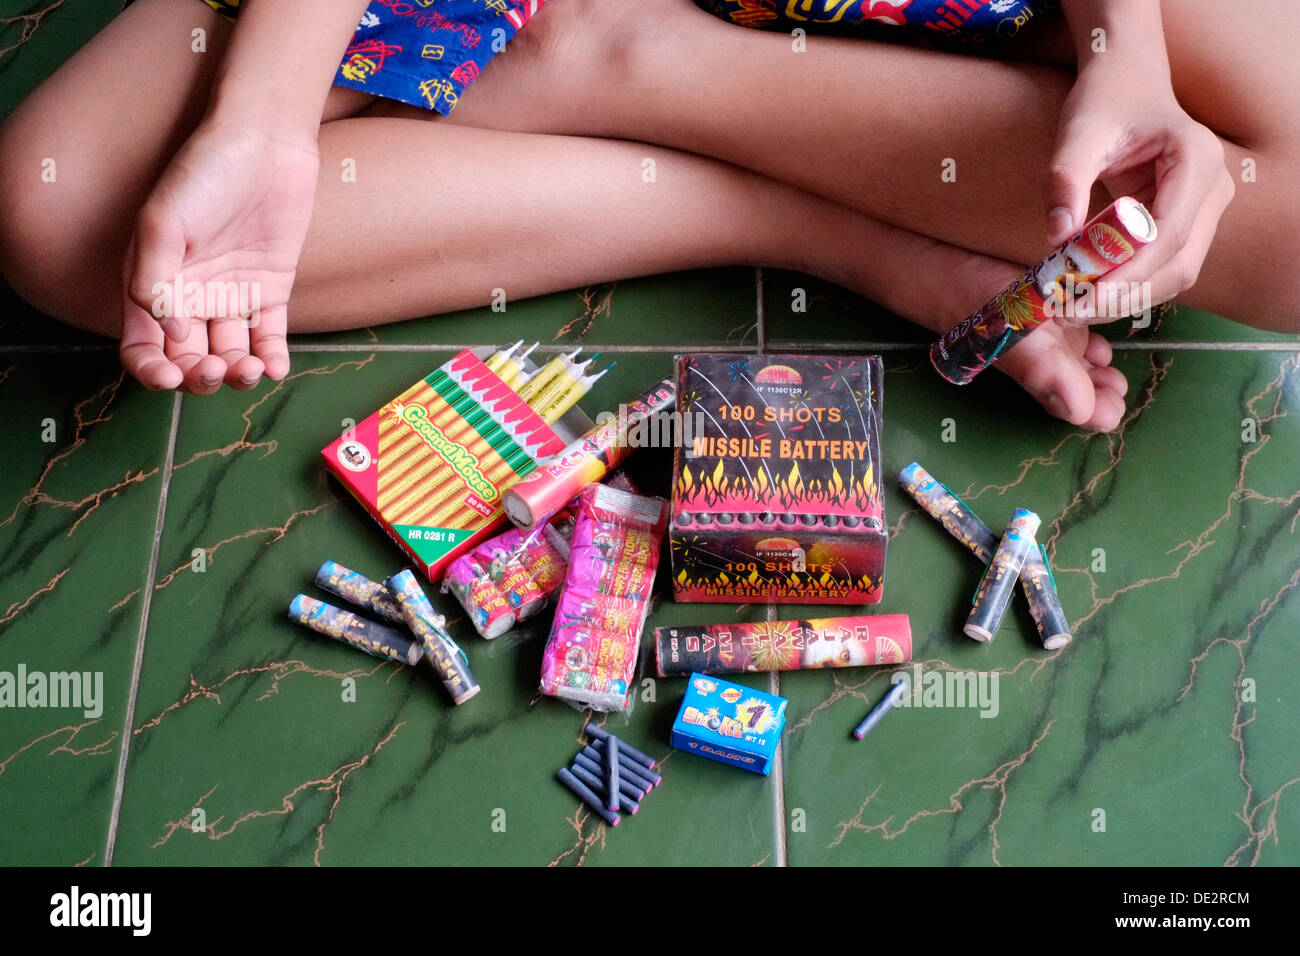 young indonesian boy with his collection of fireworks to celebrate the holidays with Stock Photo